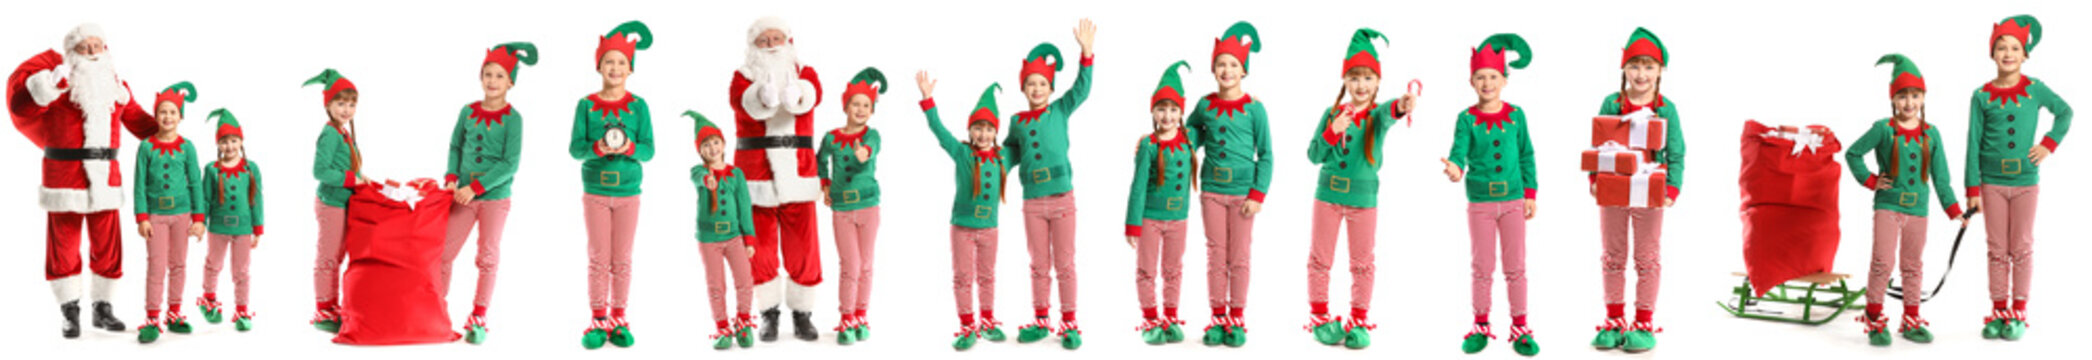 Santa Claus and little elf kids on white background